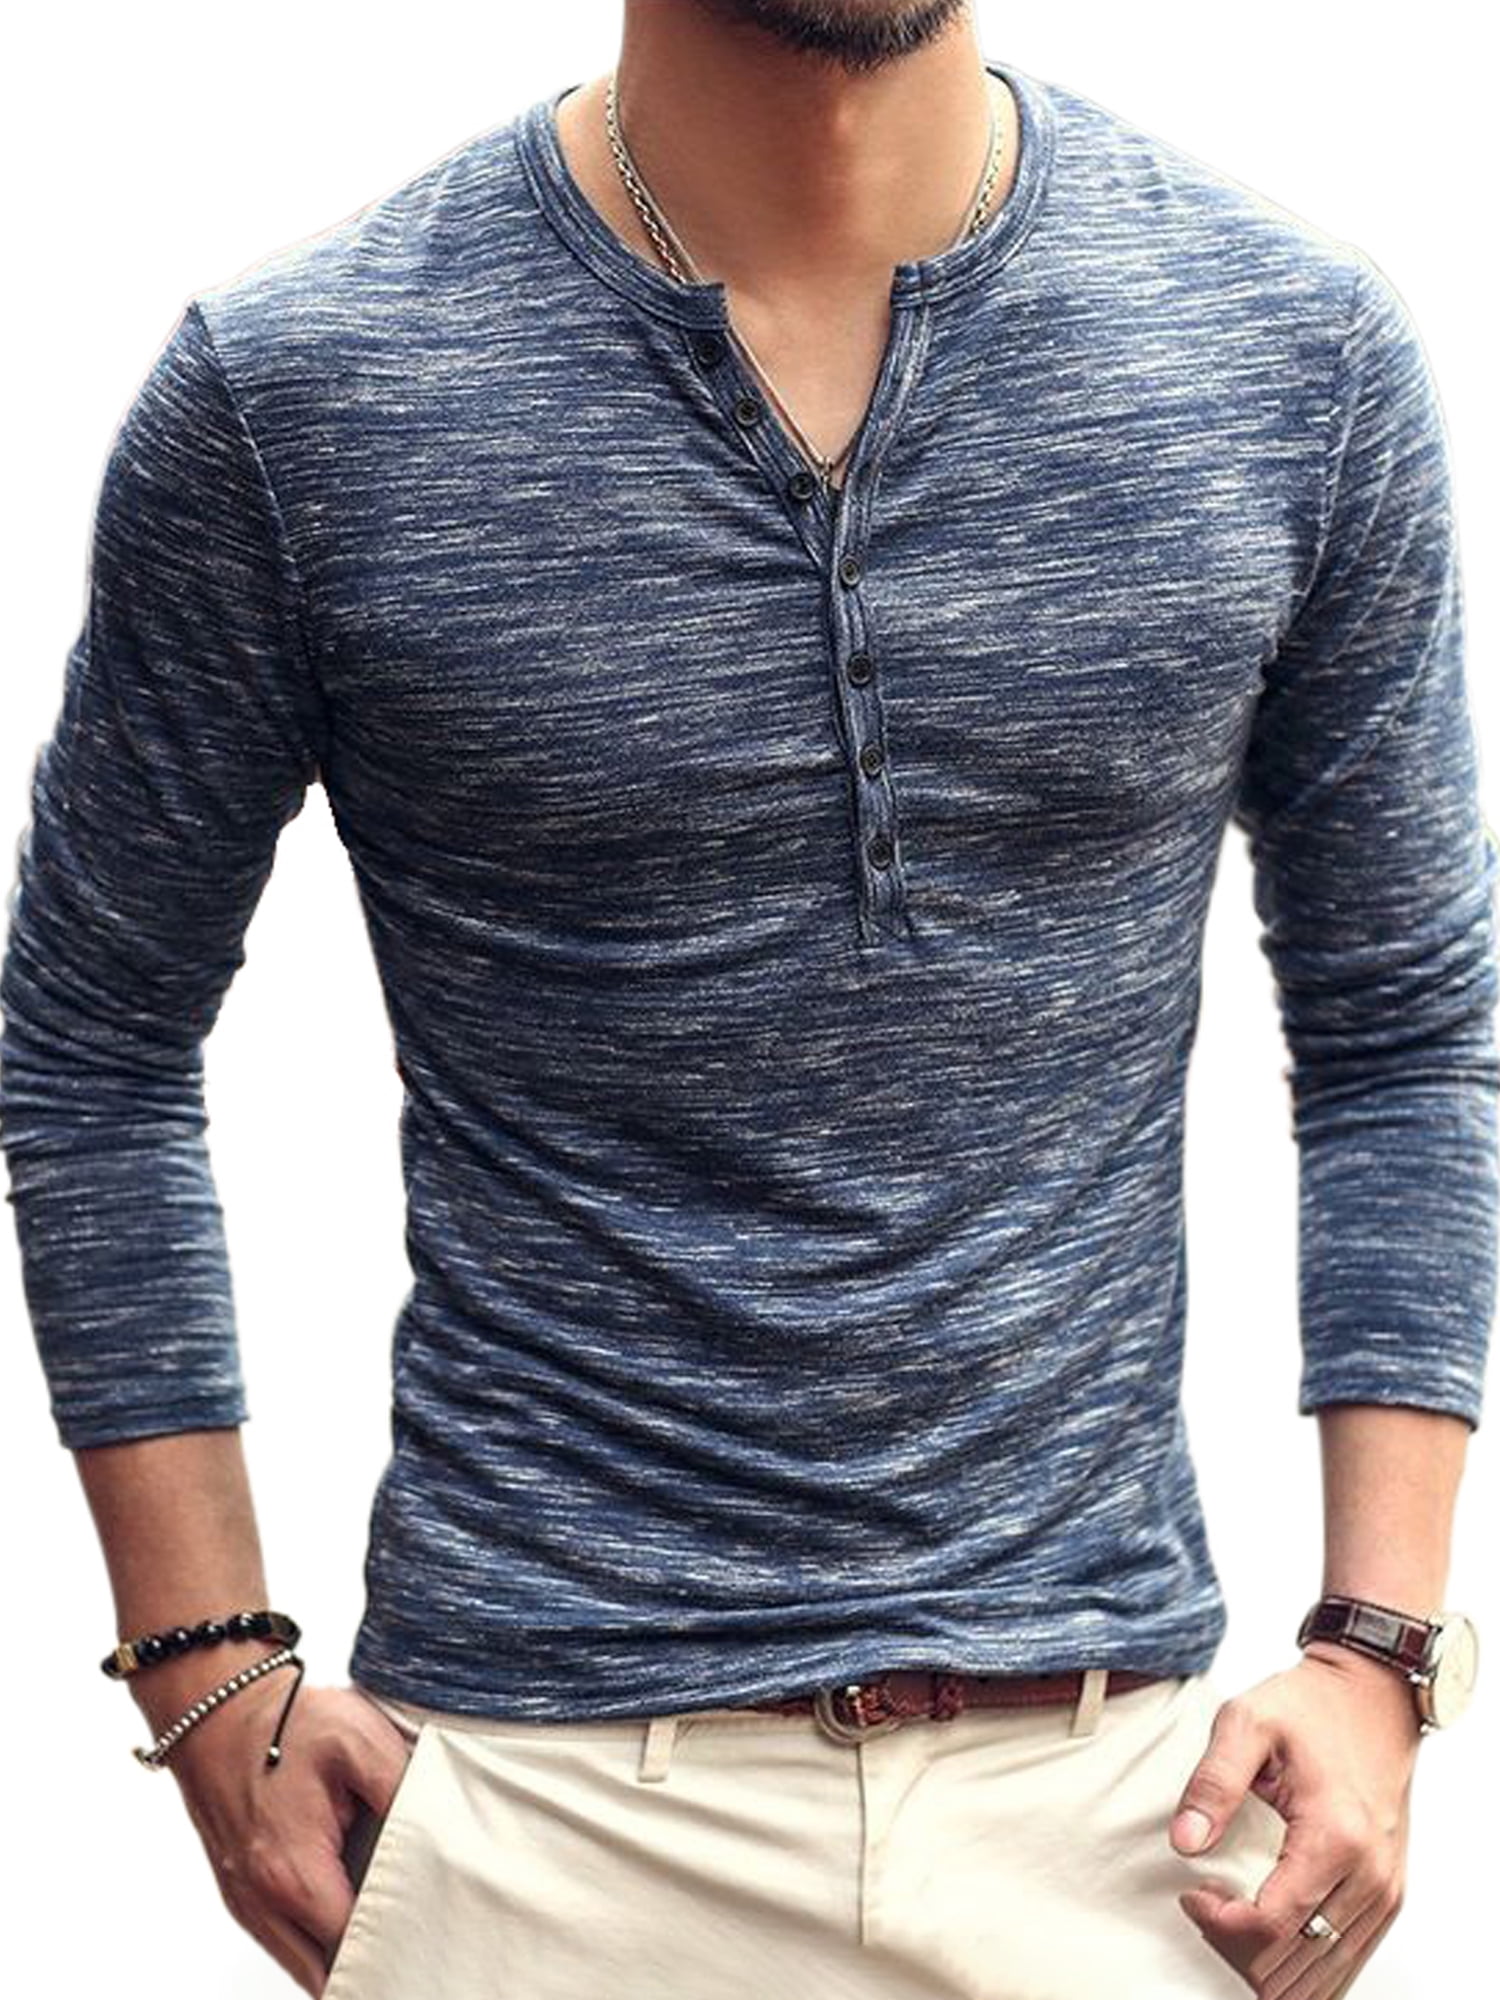 athletic fit henley shirts